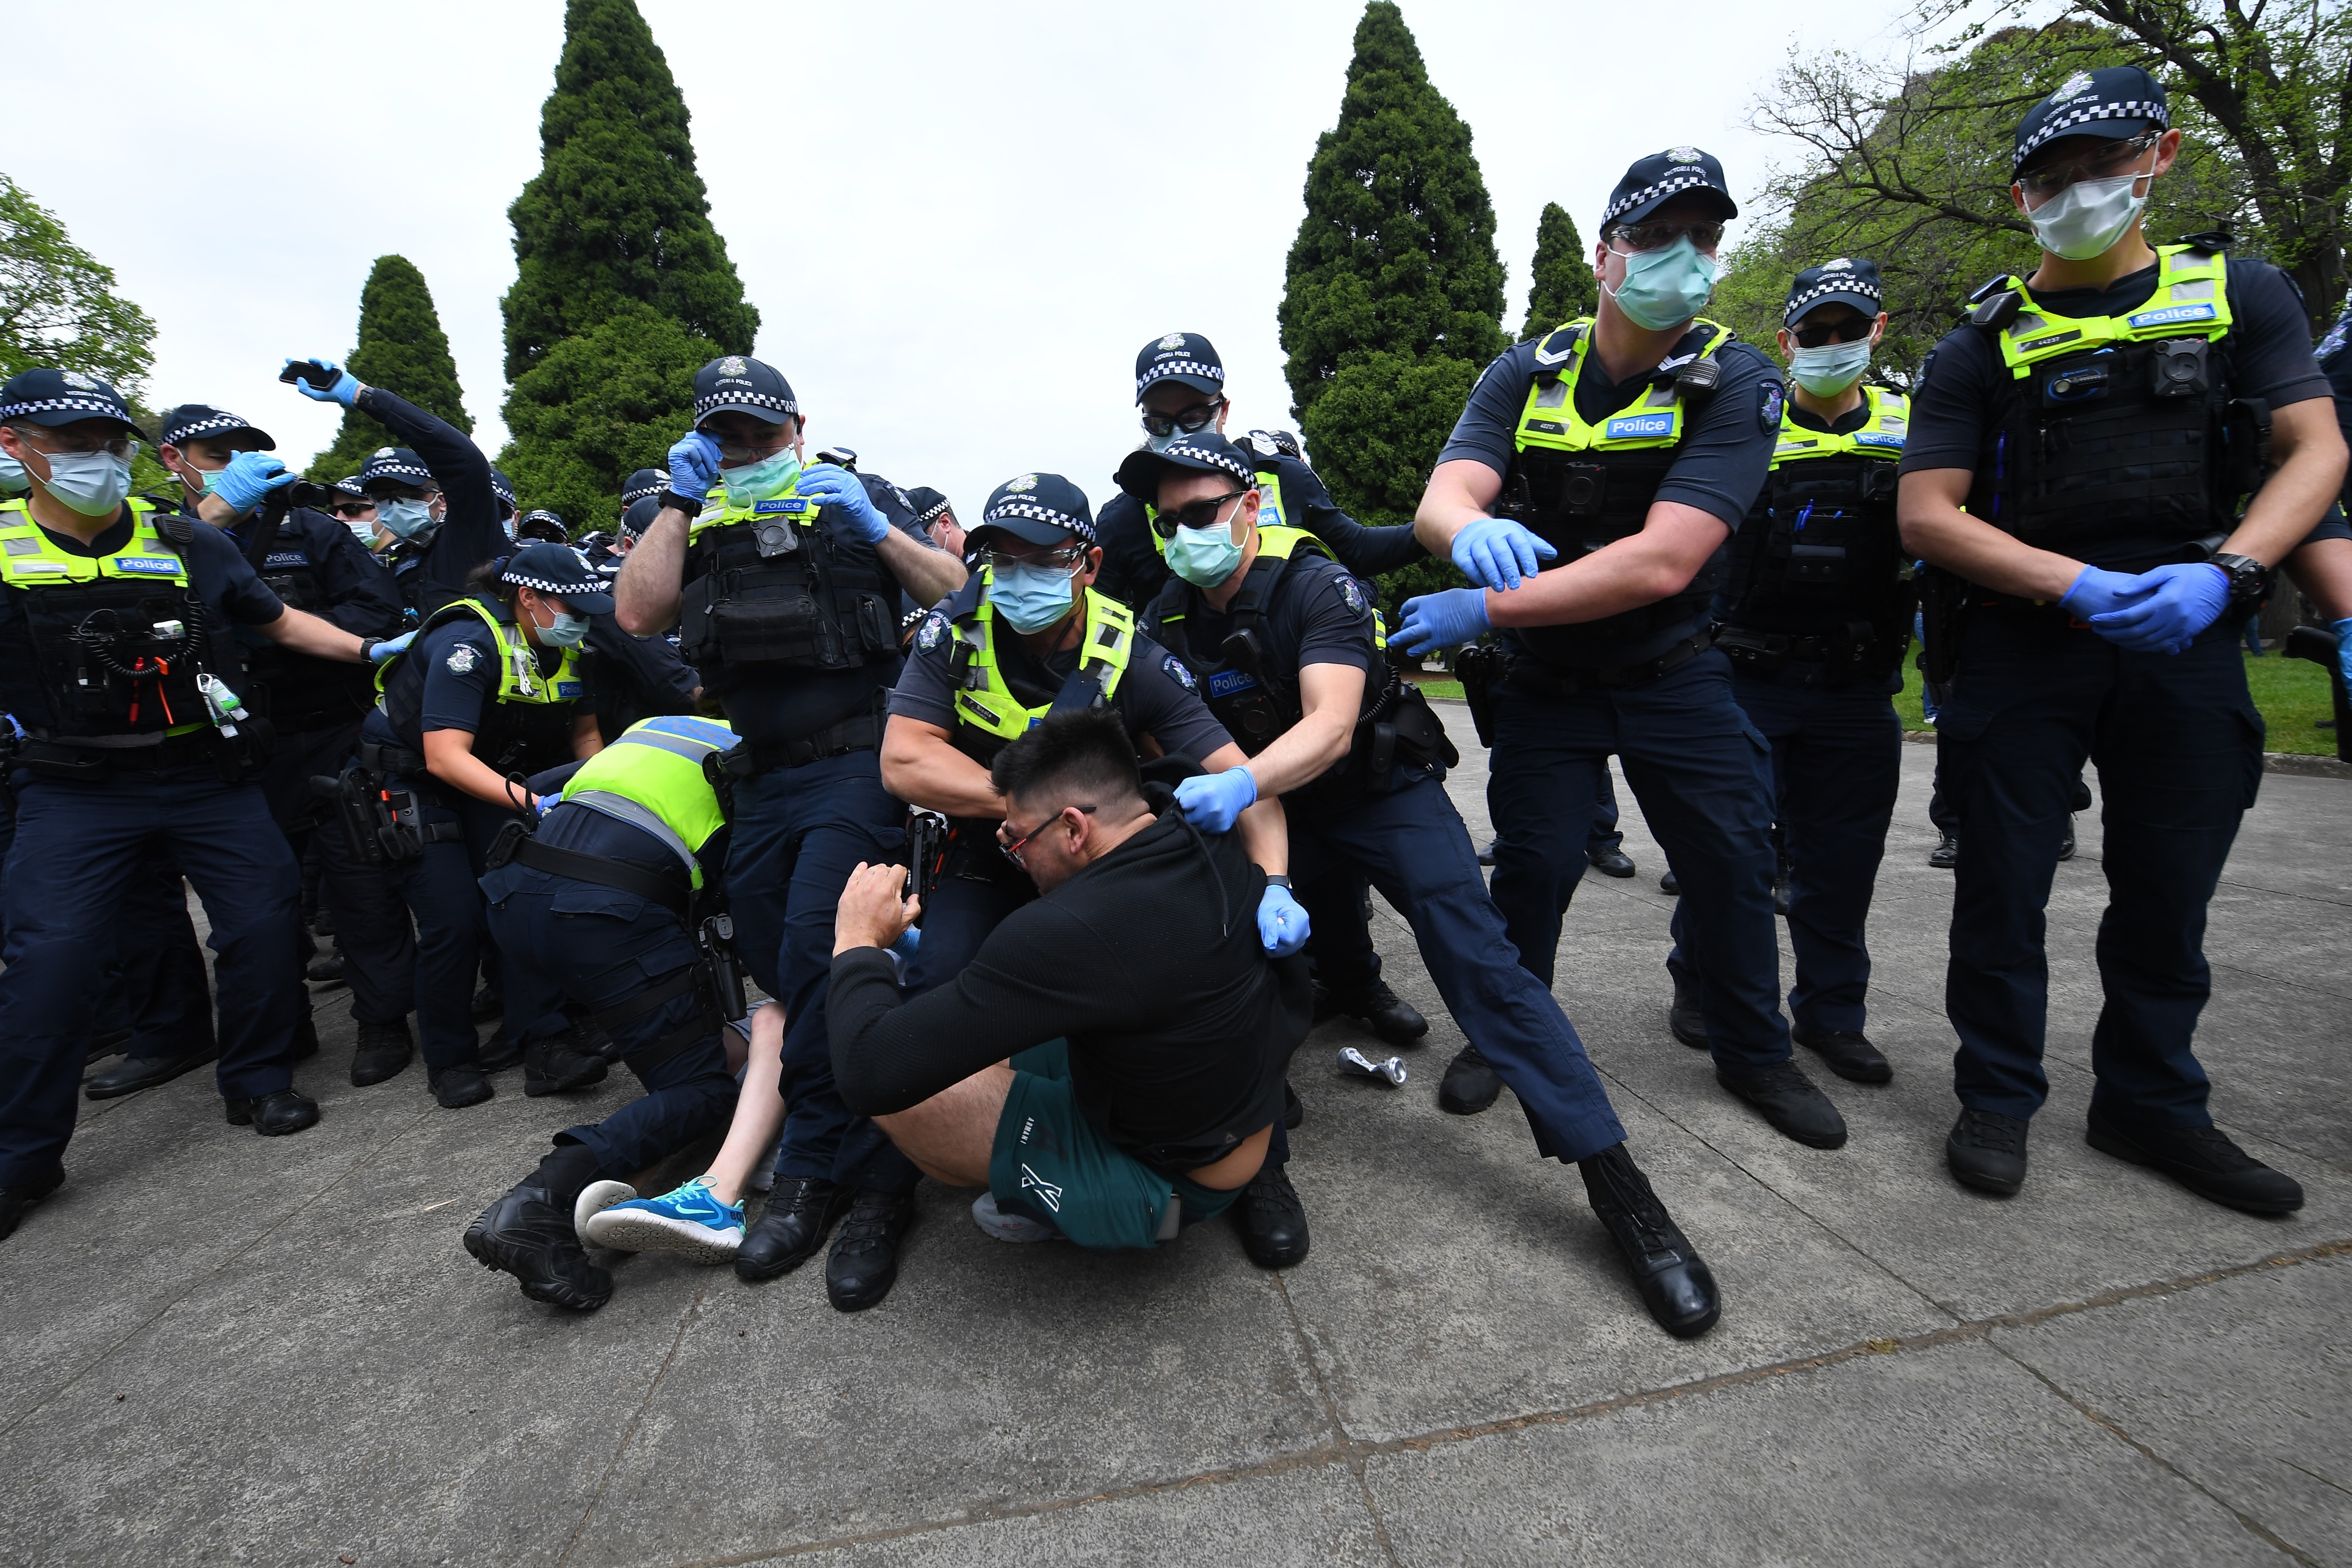 Protesters are seen during an anti-lockdown protest in Melbourne on 23 October.